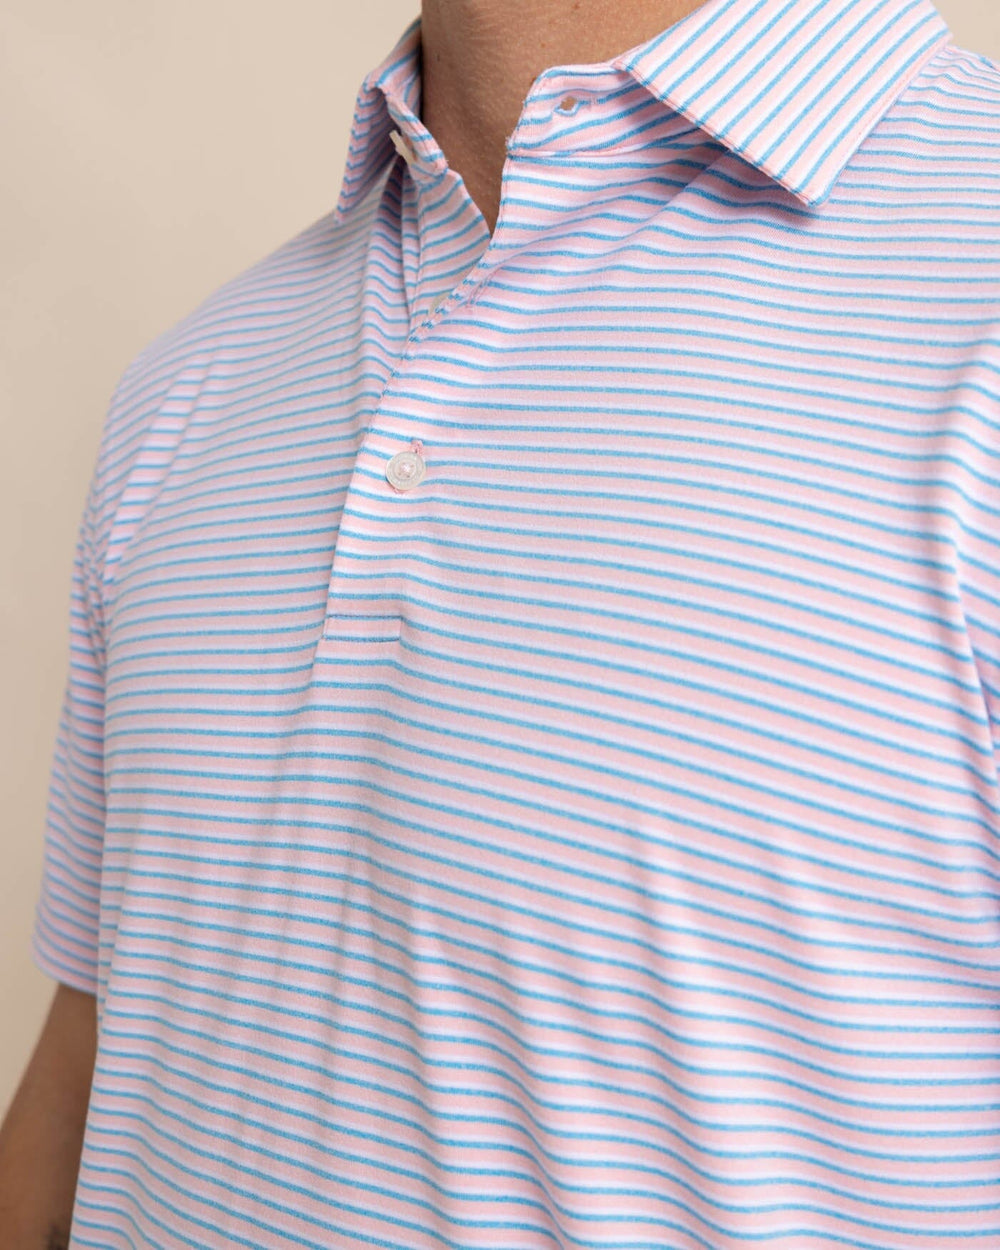 The detail view of the Southern Tide Ryder Heather Halls Performance Polo by Southern Tide - Heather Pale Rosette Pink